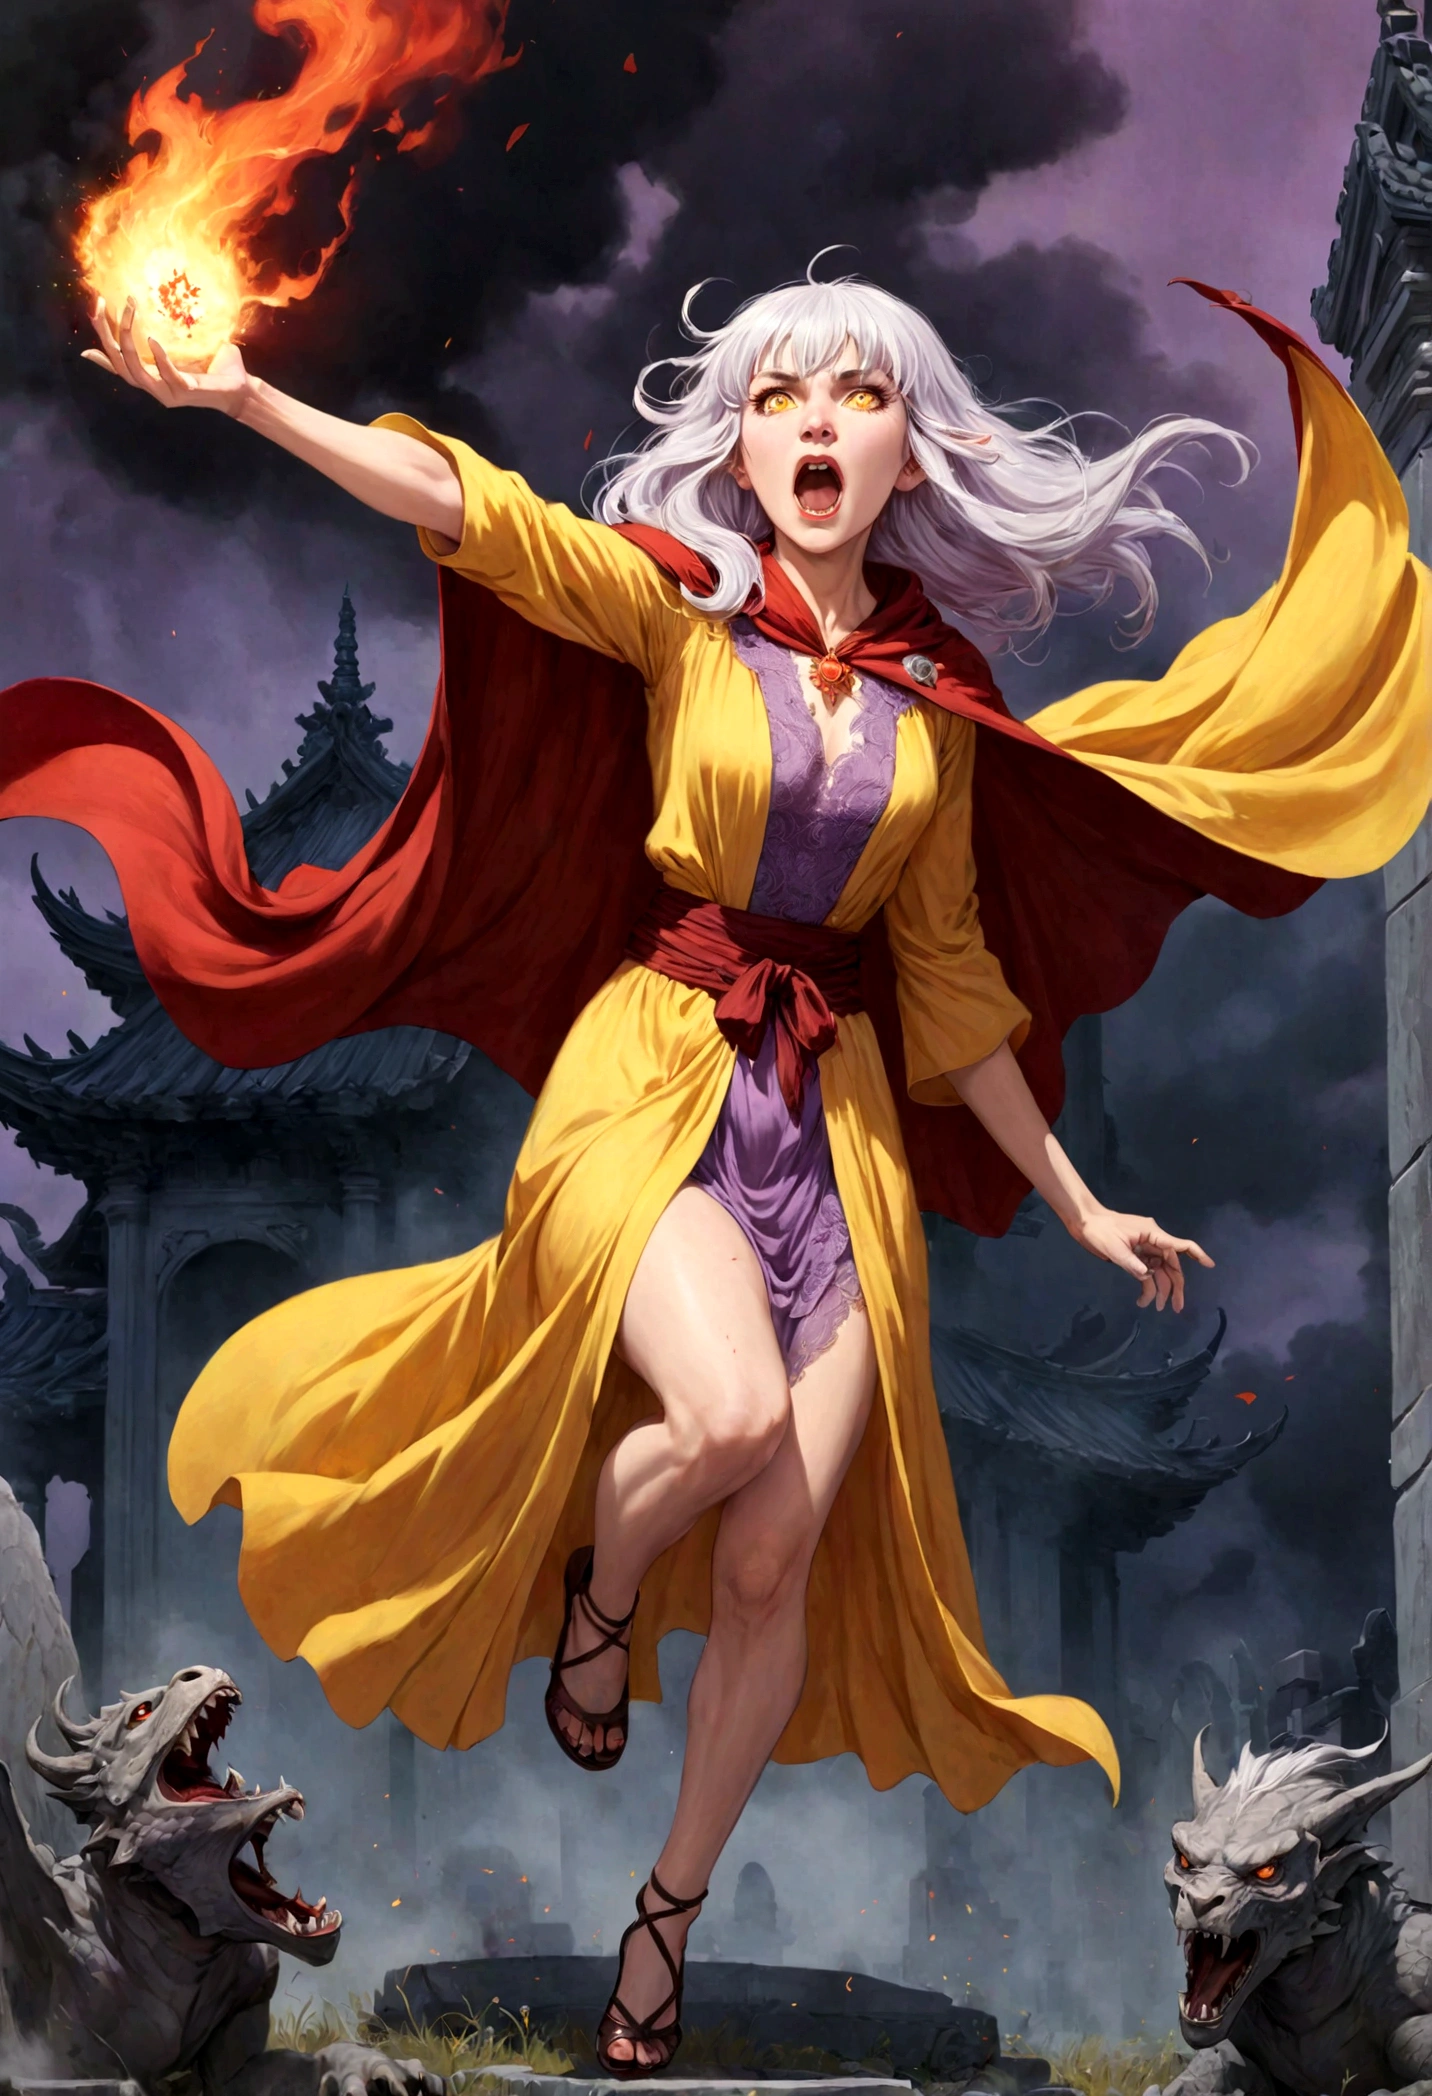 (Ultra-detailed face, Roar, shout:1.3), (Fantasy Illustration with Gothic & Ukiyo-e & Comic Art), (Full Body, A middle-aged elf woman with white hair, blunt bangs, Very Very long disheveled hair, lavender eyes), (She is wearing a yellow cape dress with blood-stained lace), (With a shout, he jumps up and strikes a bold pose, flames exploding in the center of his hands), BREAK (In the background, an old temple and a cemetery can be seen, and the flames of a dragon turn the area red)